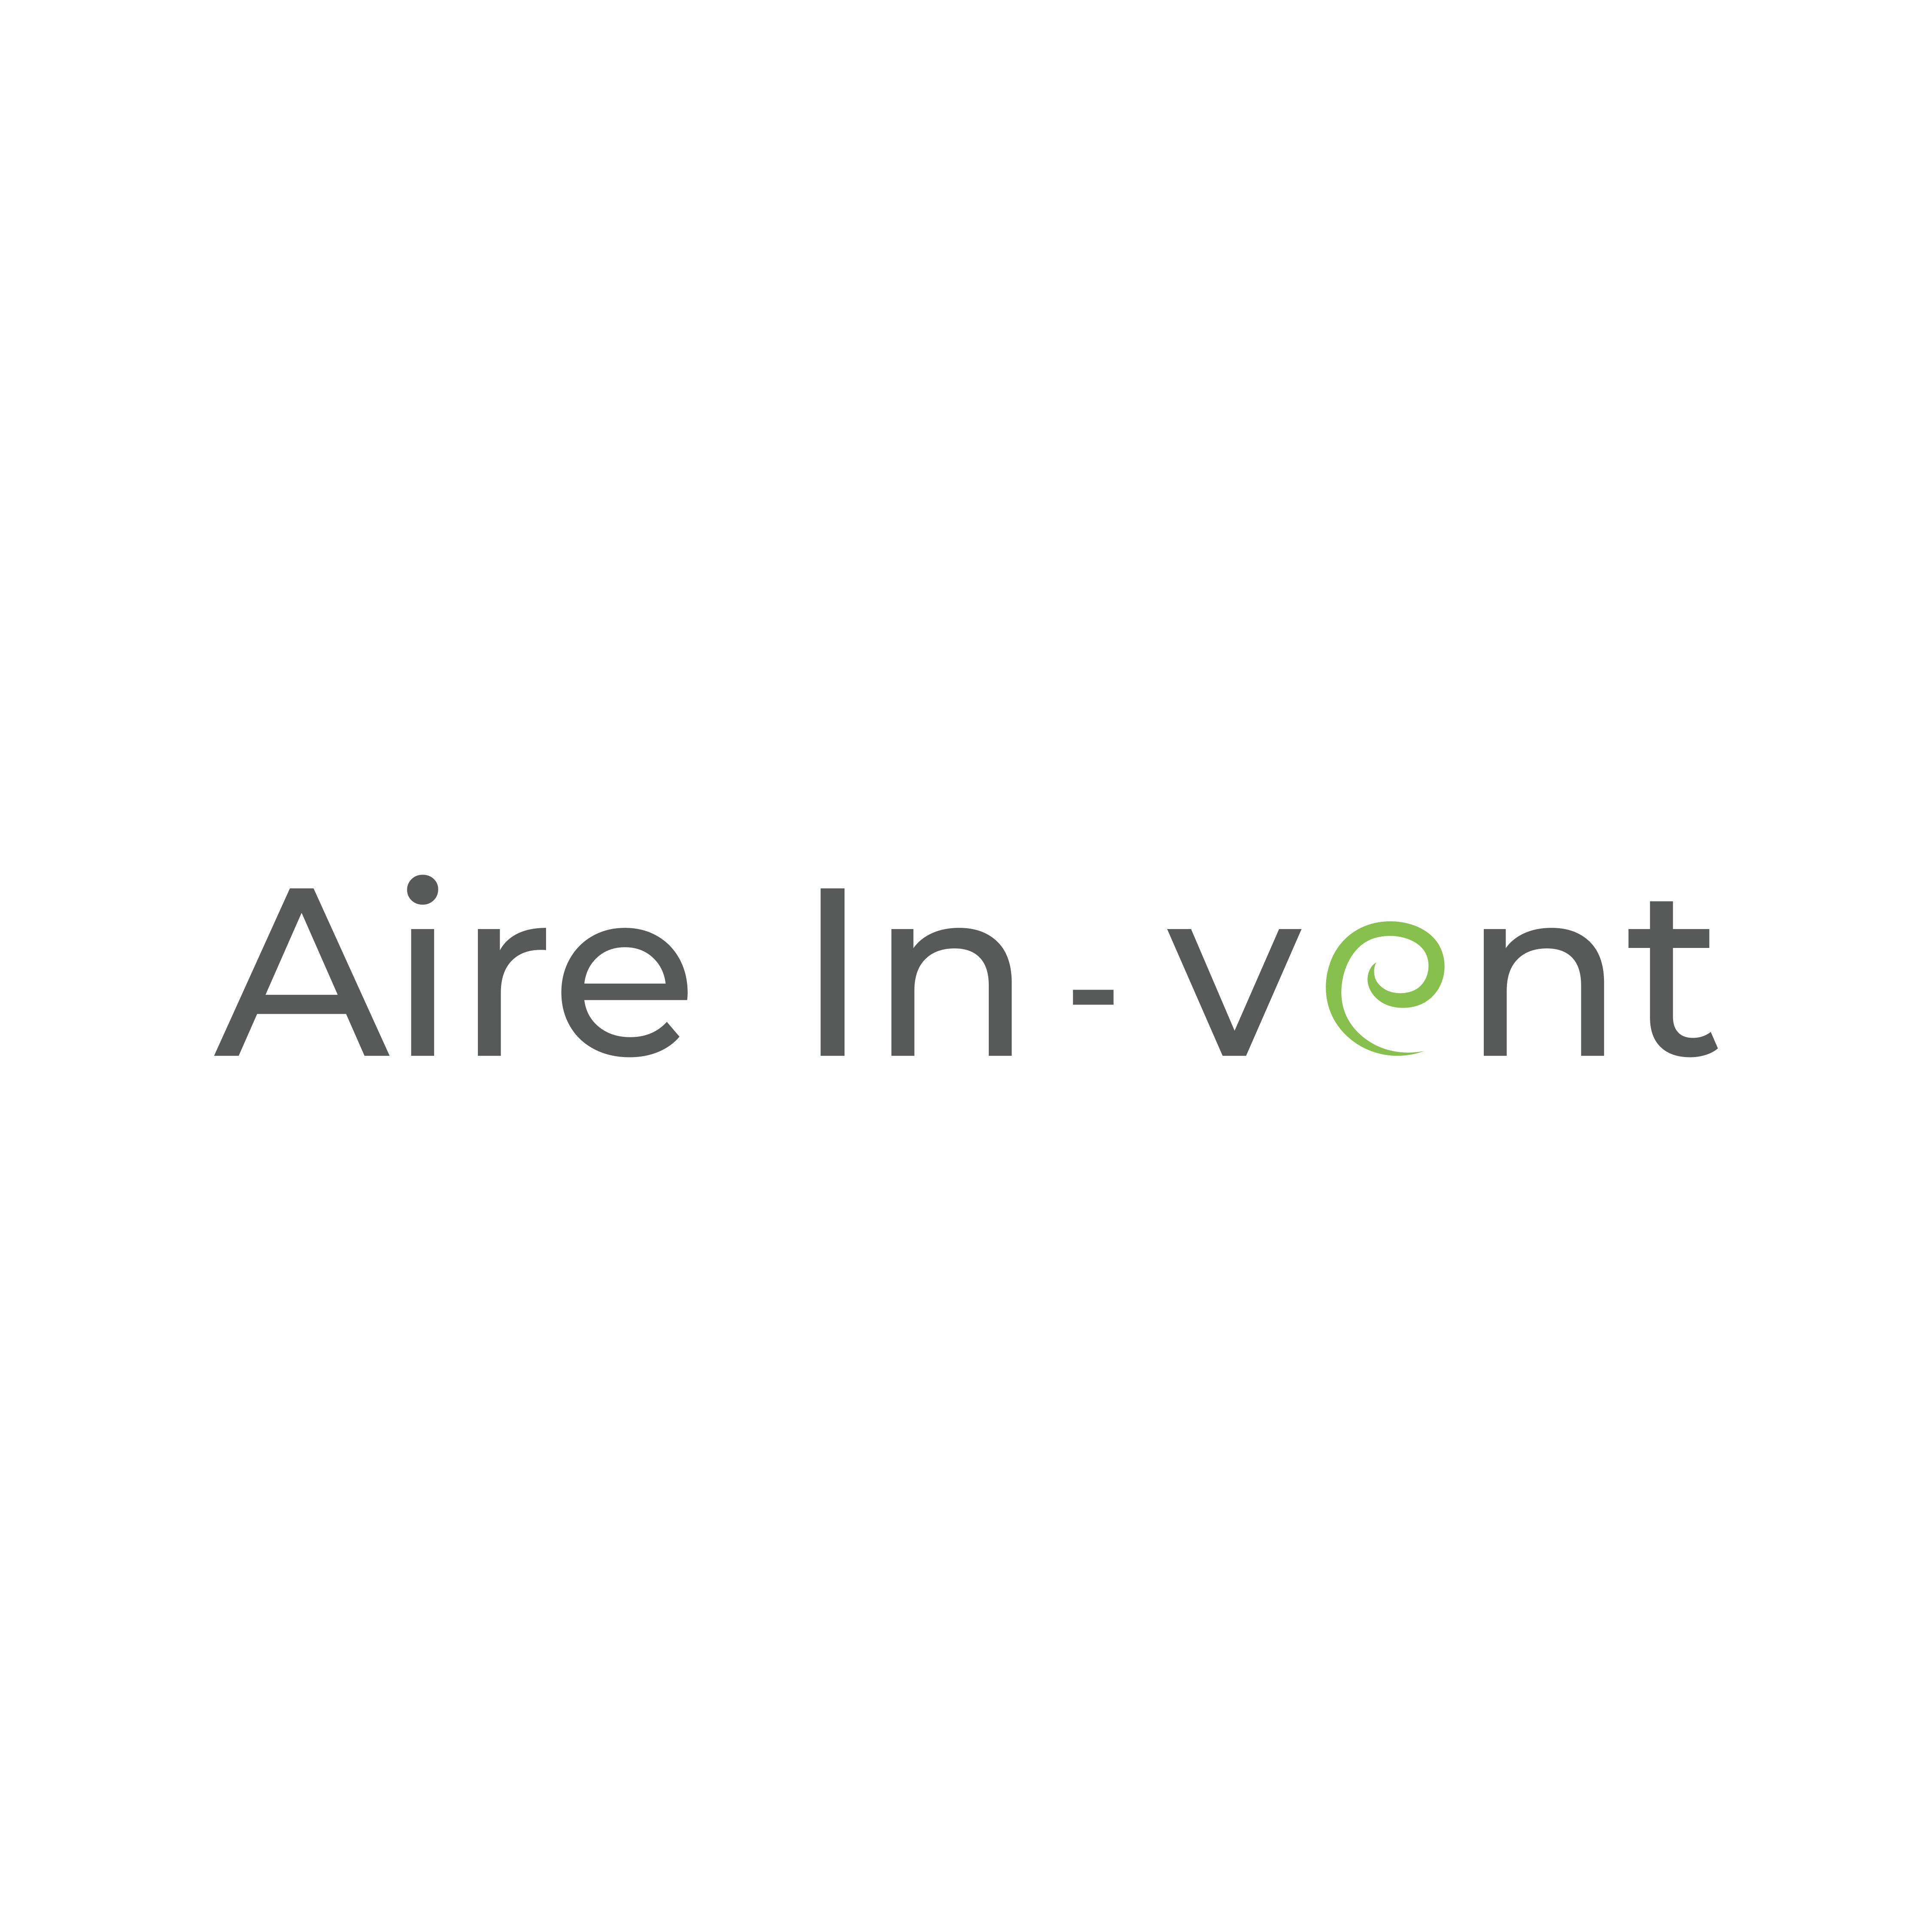 Air in vent